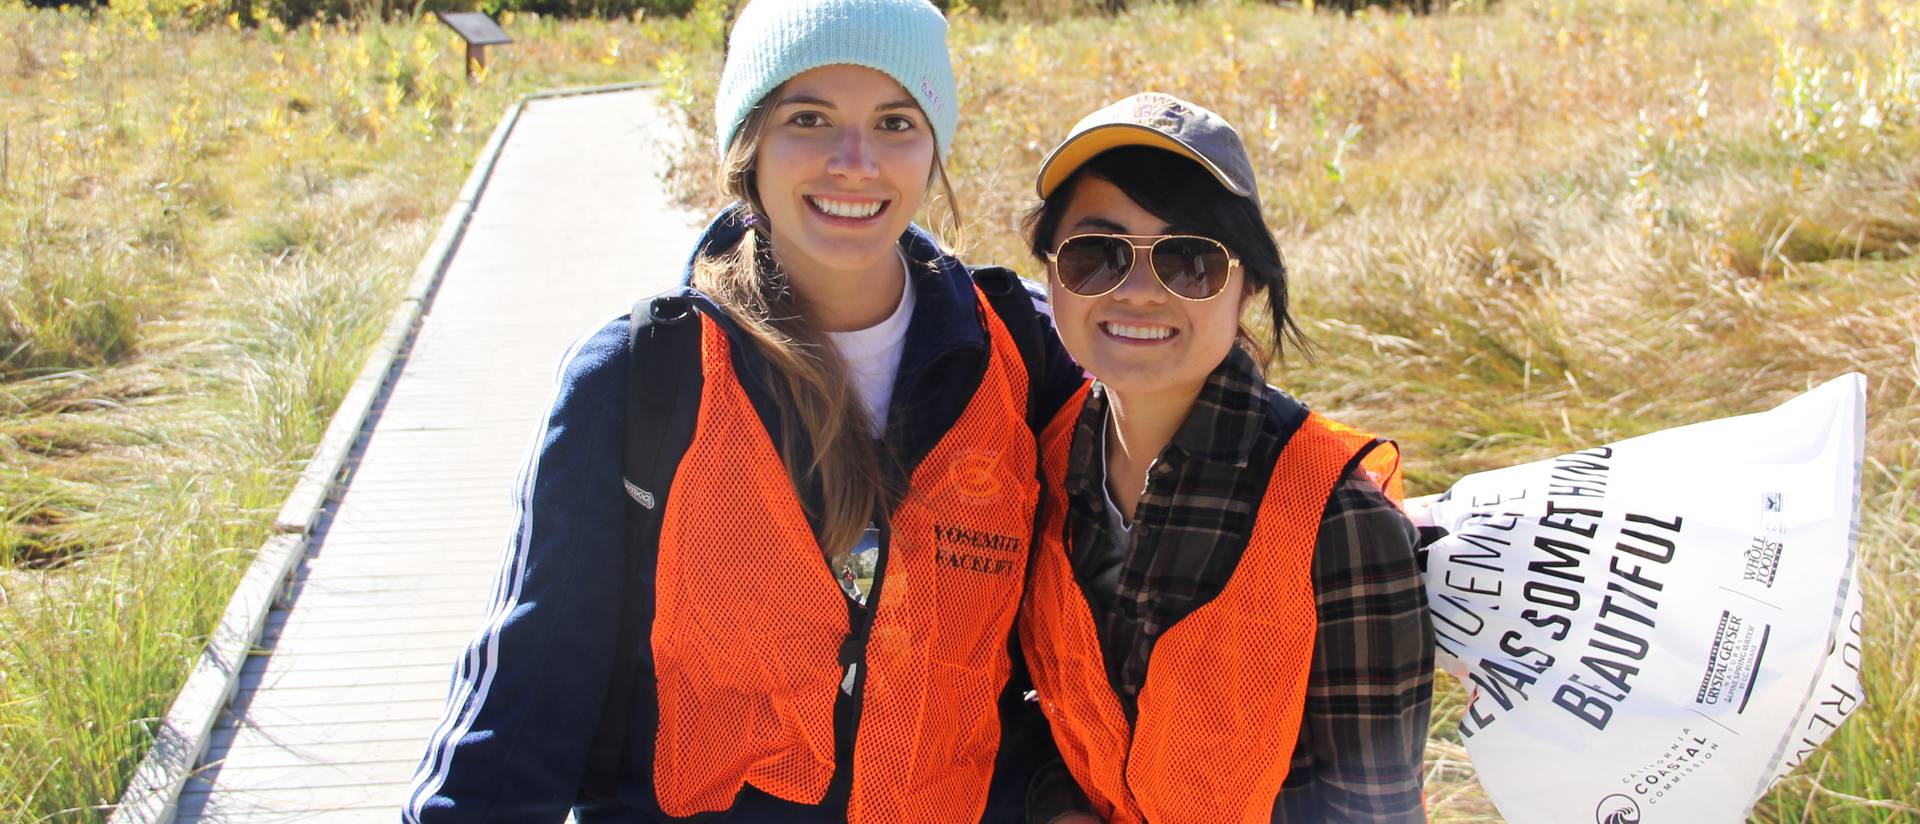 UW-Eau Claire students Deanna Kainz (left) and Sandy Thao helped with the Yosemite Facelift.